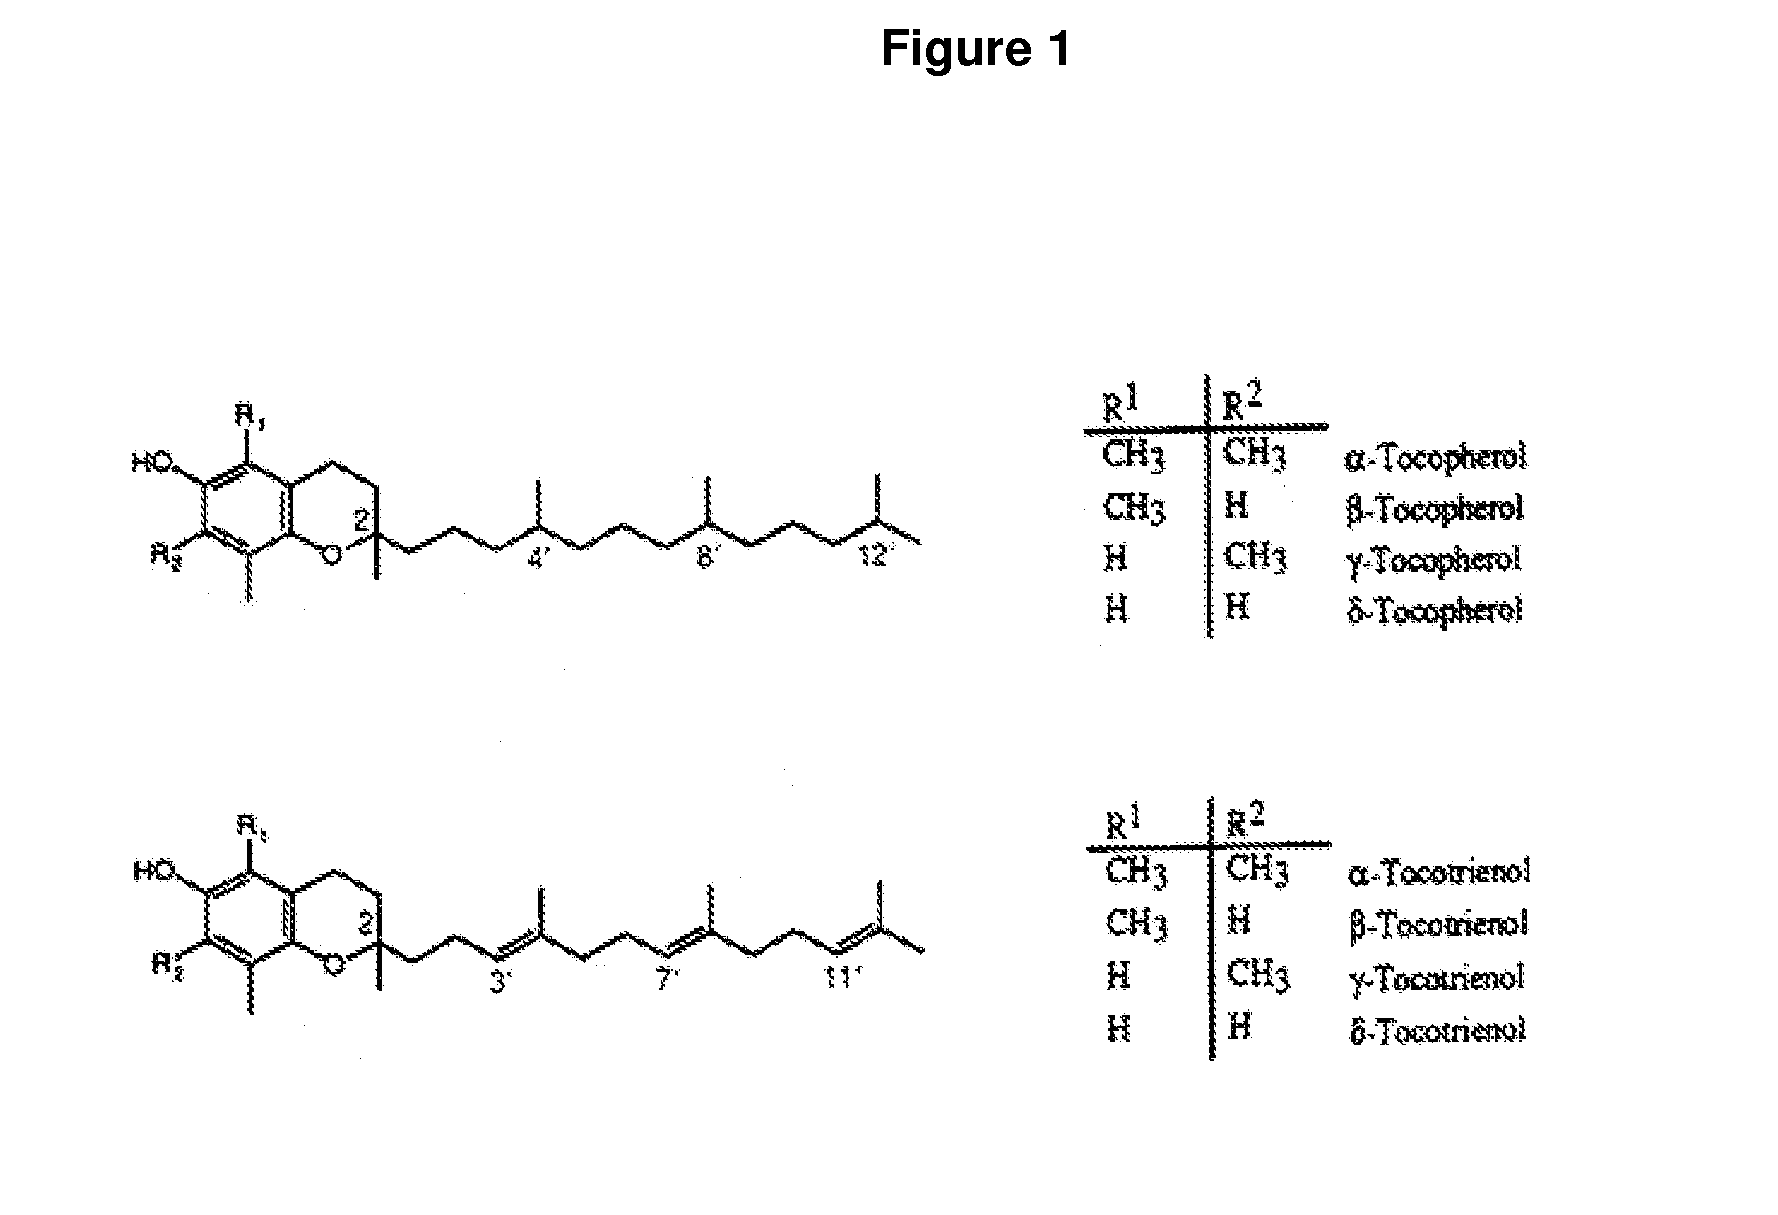 Transmucosal delivery of tocotrienol